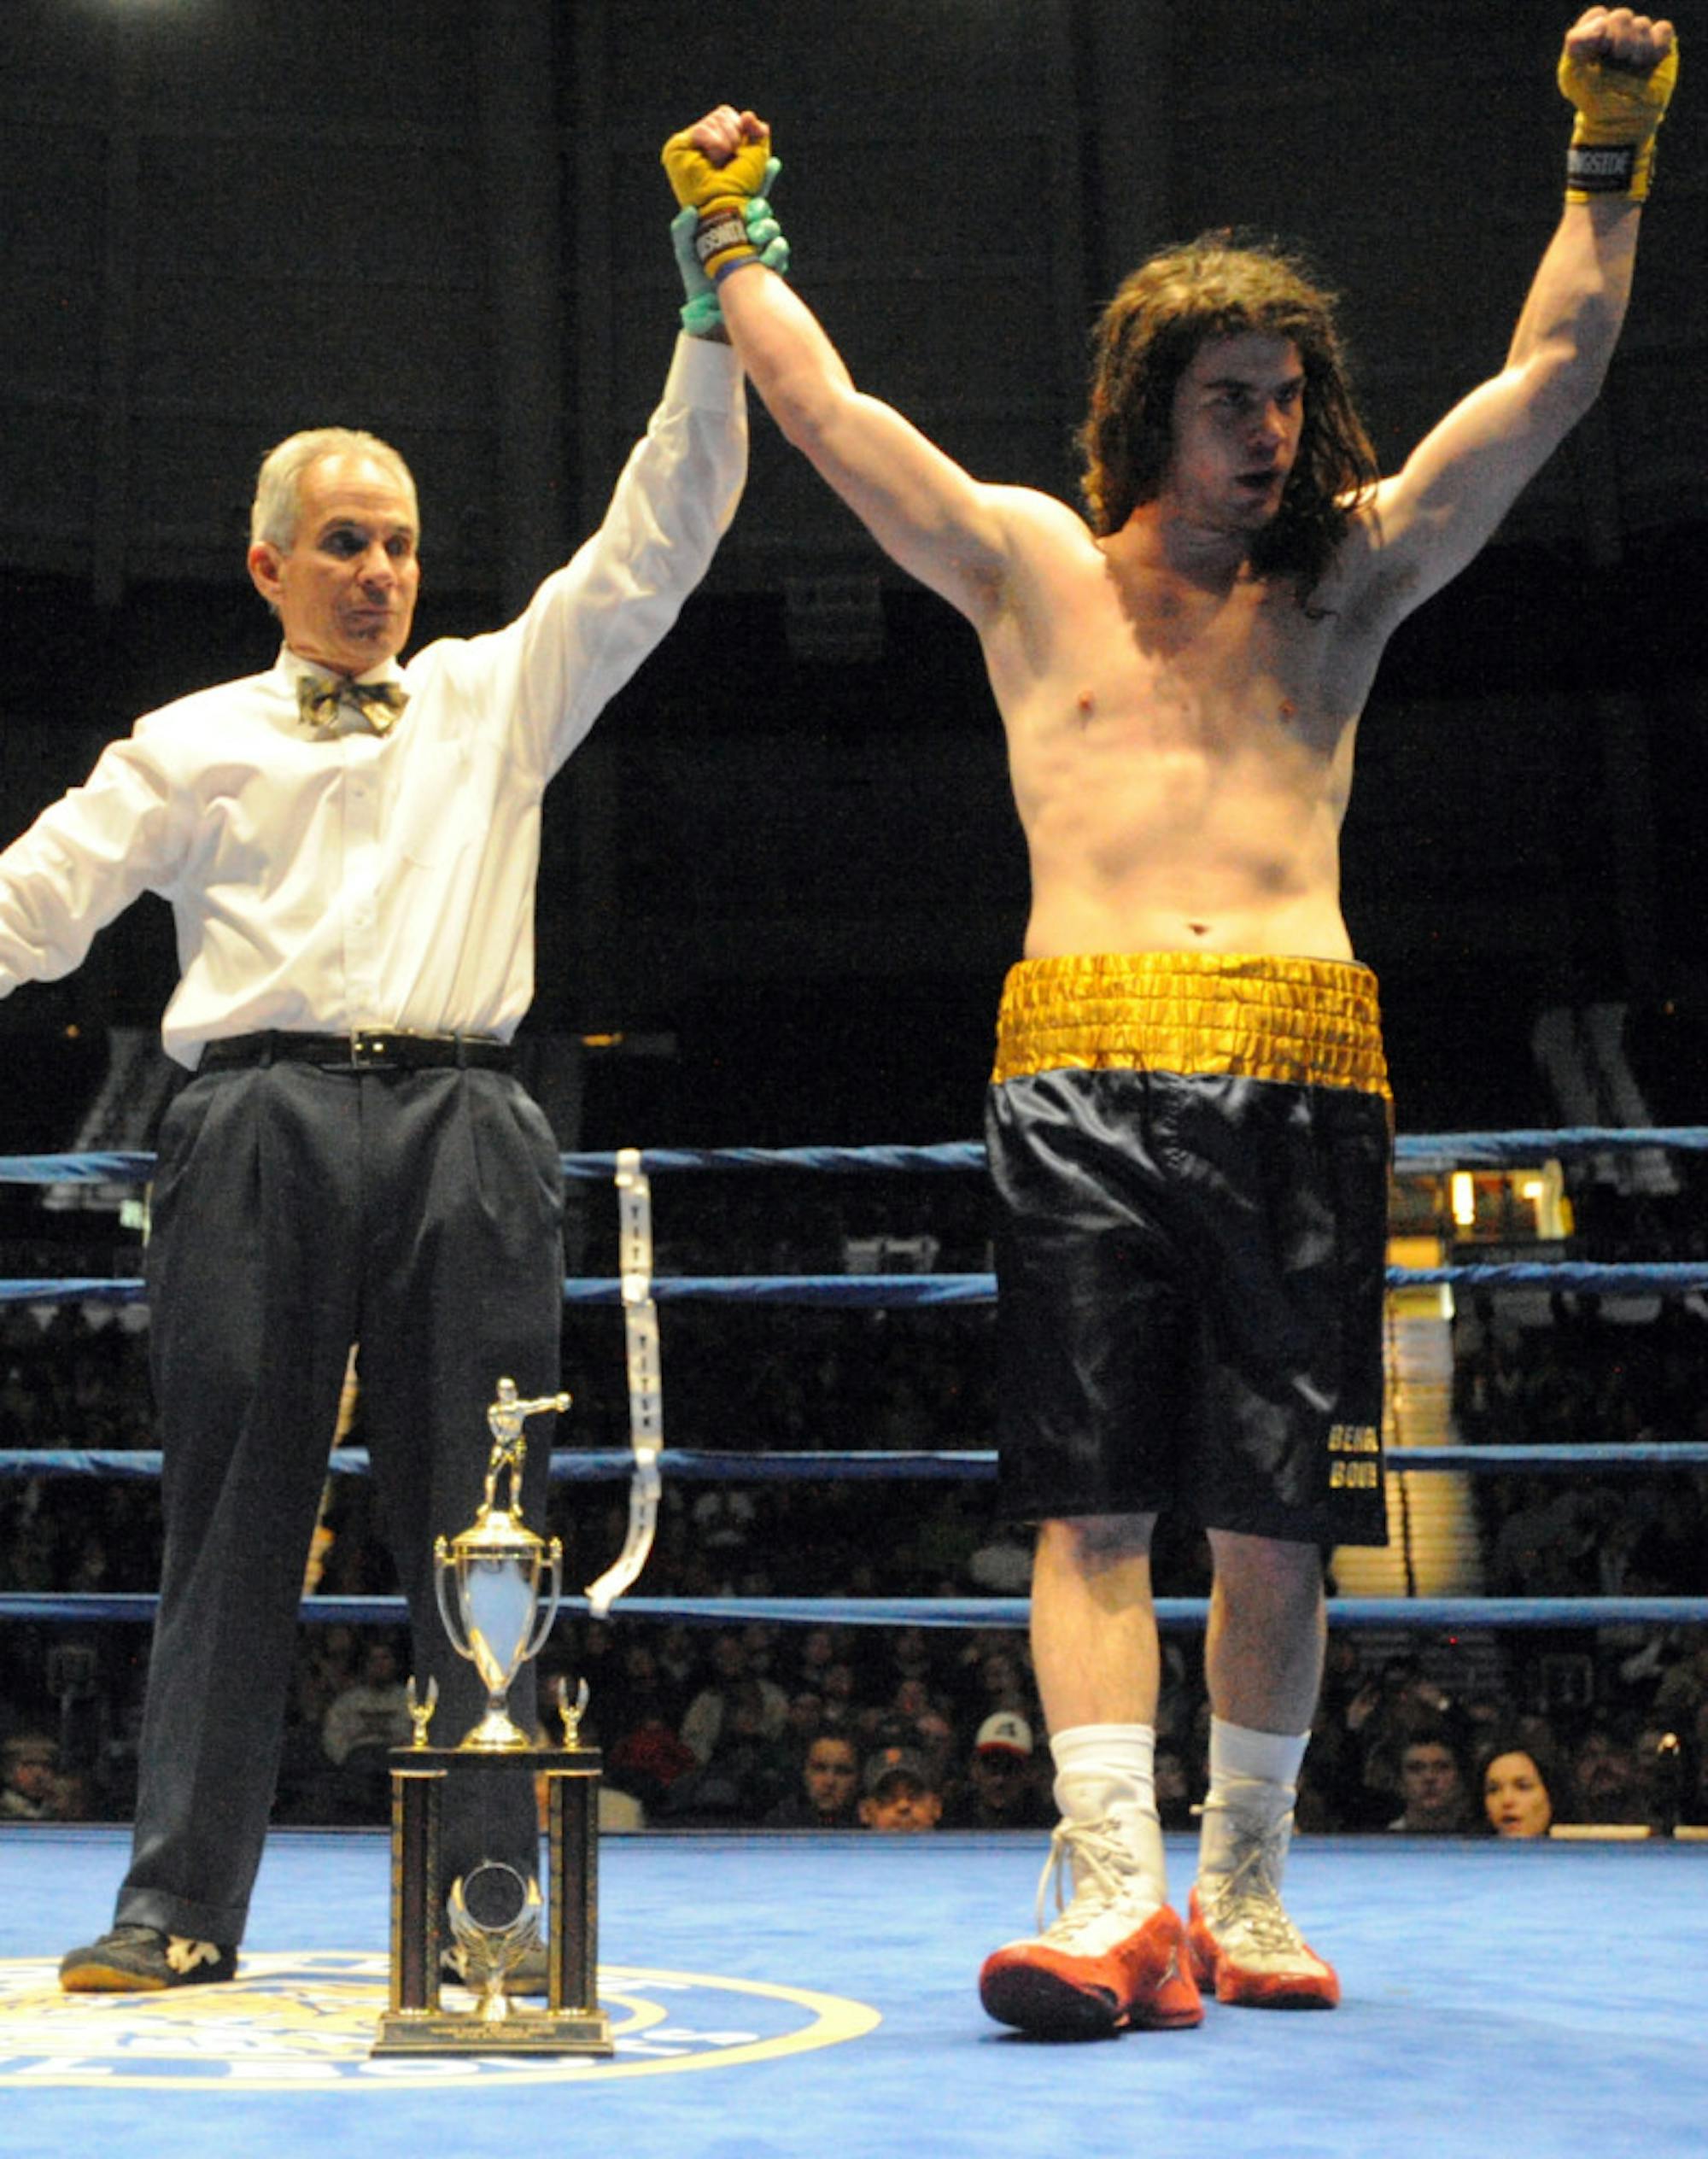 Senior Garrity McOsker celebrates after winning the 2014 Bengal Bouts title in the 162-pound weight class.